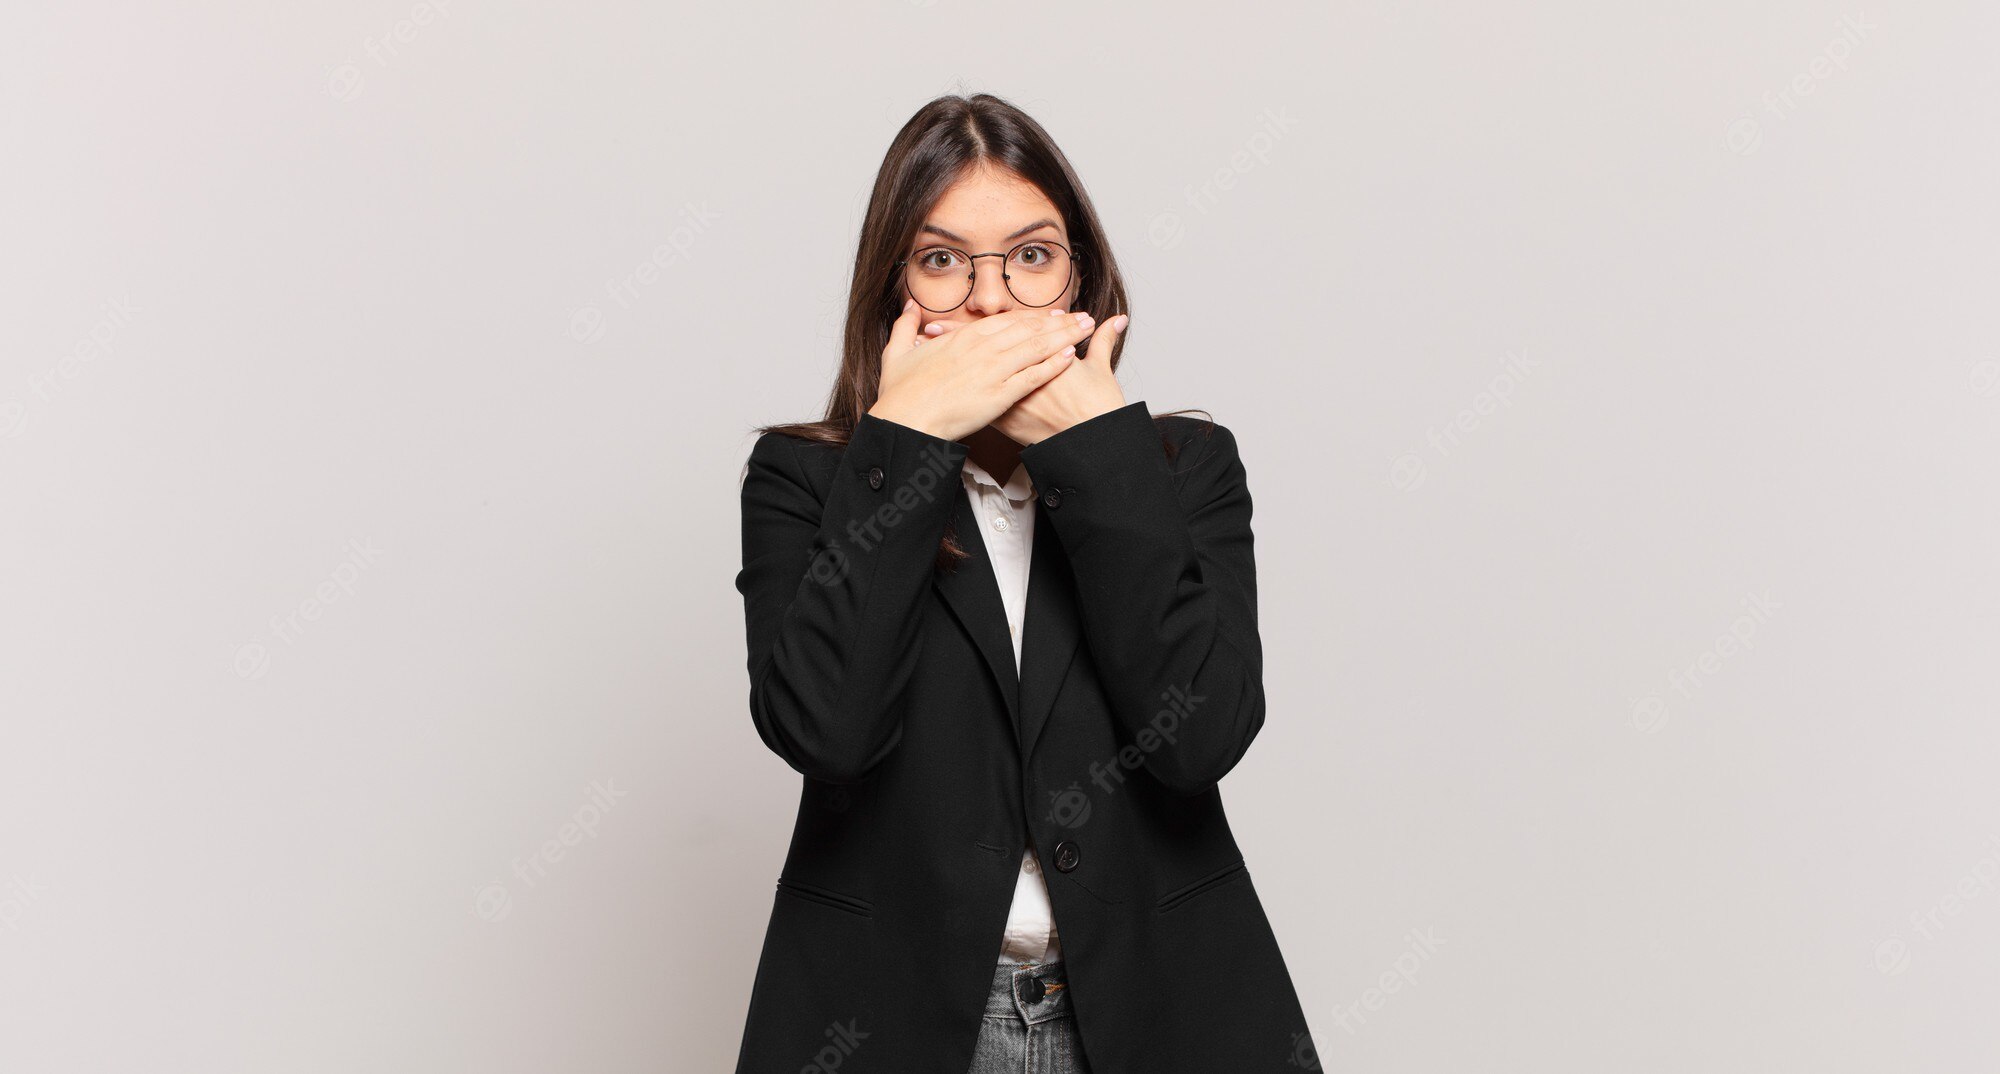 young-business-woman-covering-mouth-with-hands-with-shocked-surprised-expression